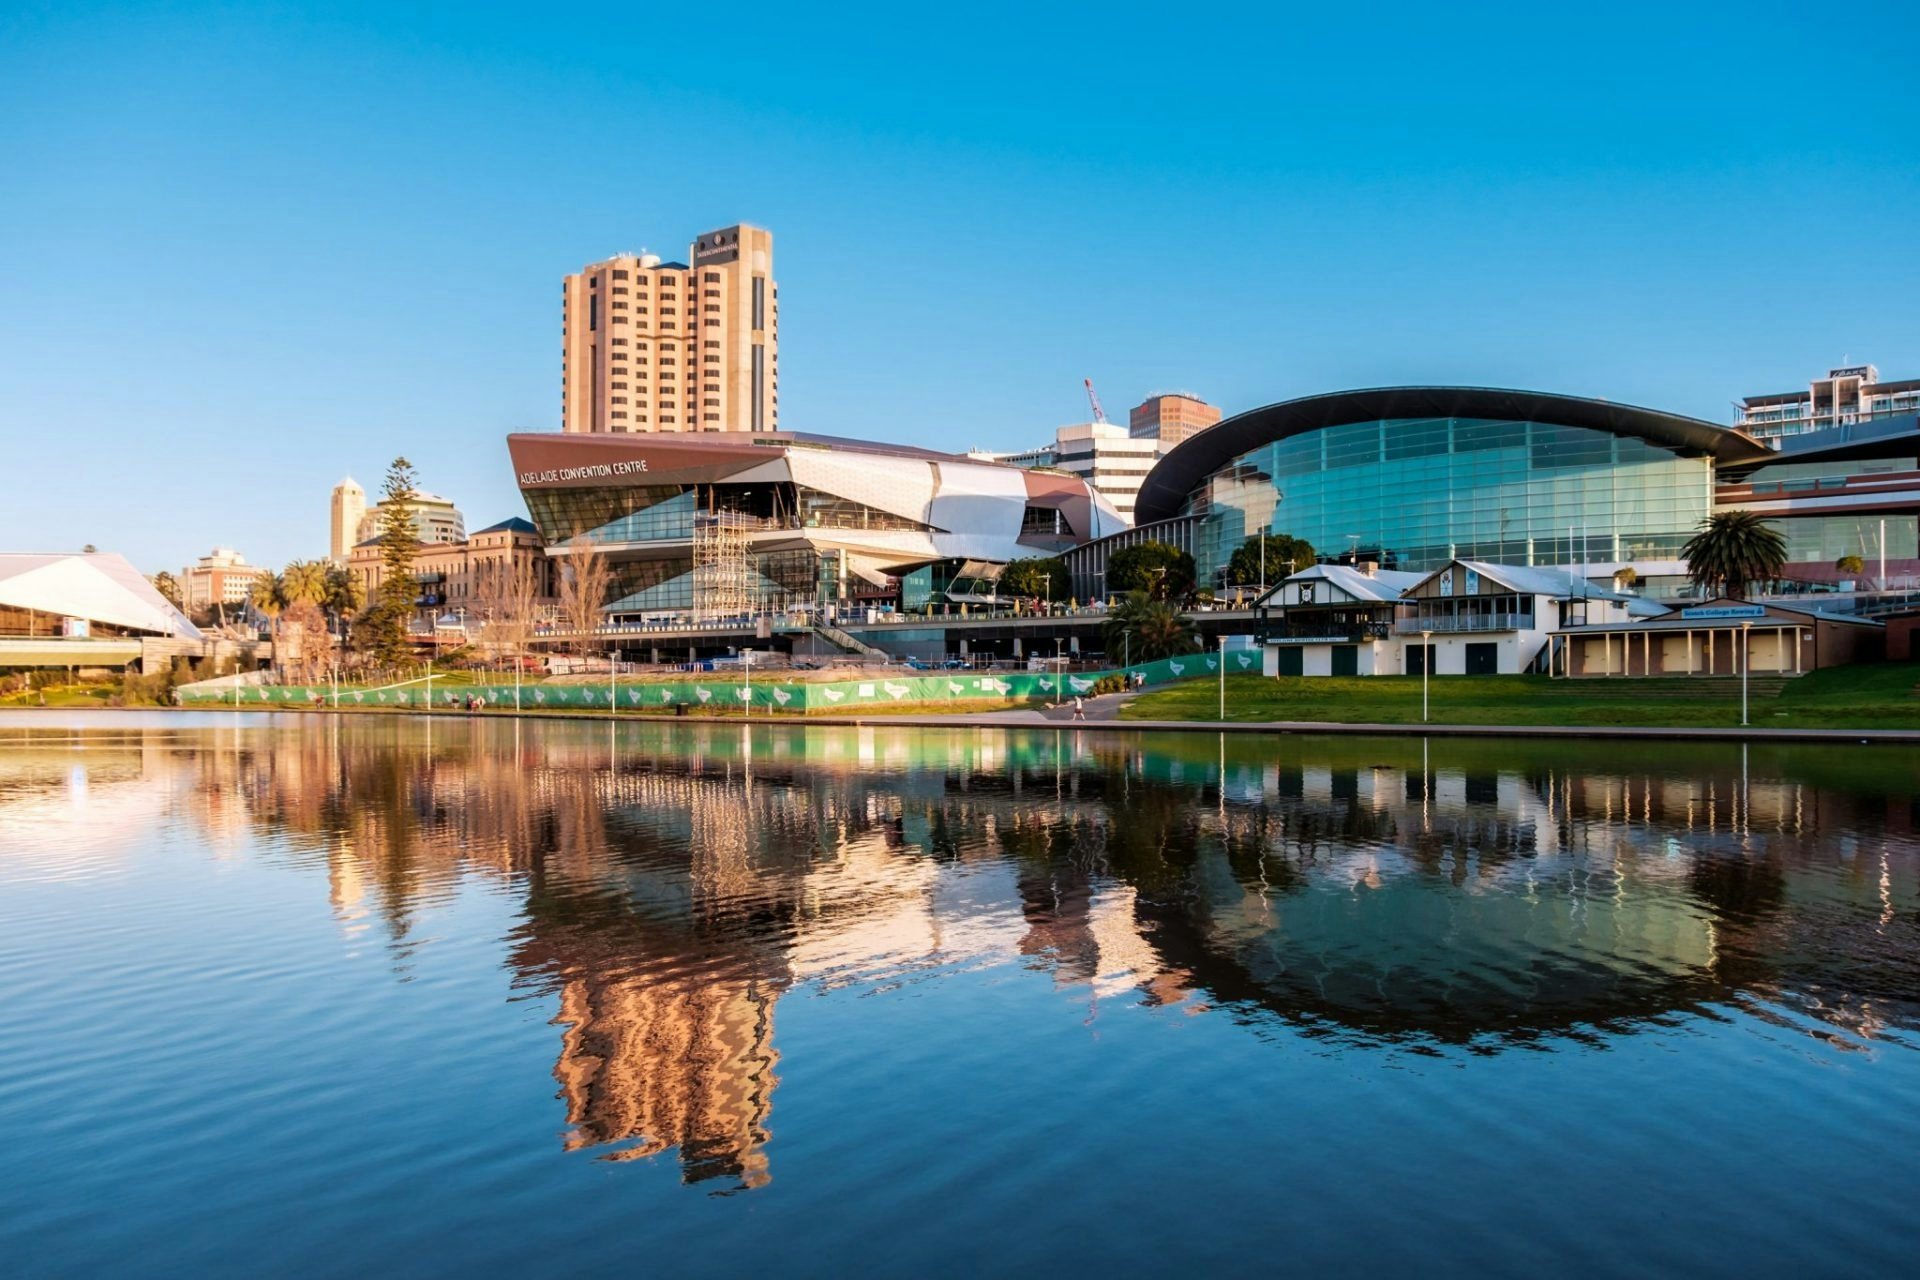 A view of Adelaide city center. Adelaide and other Australian cities have a strong potential for health tourism catering to Asian travelers. Photo: Shutterstock